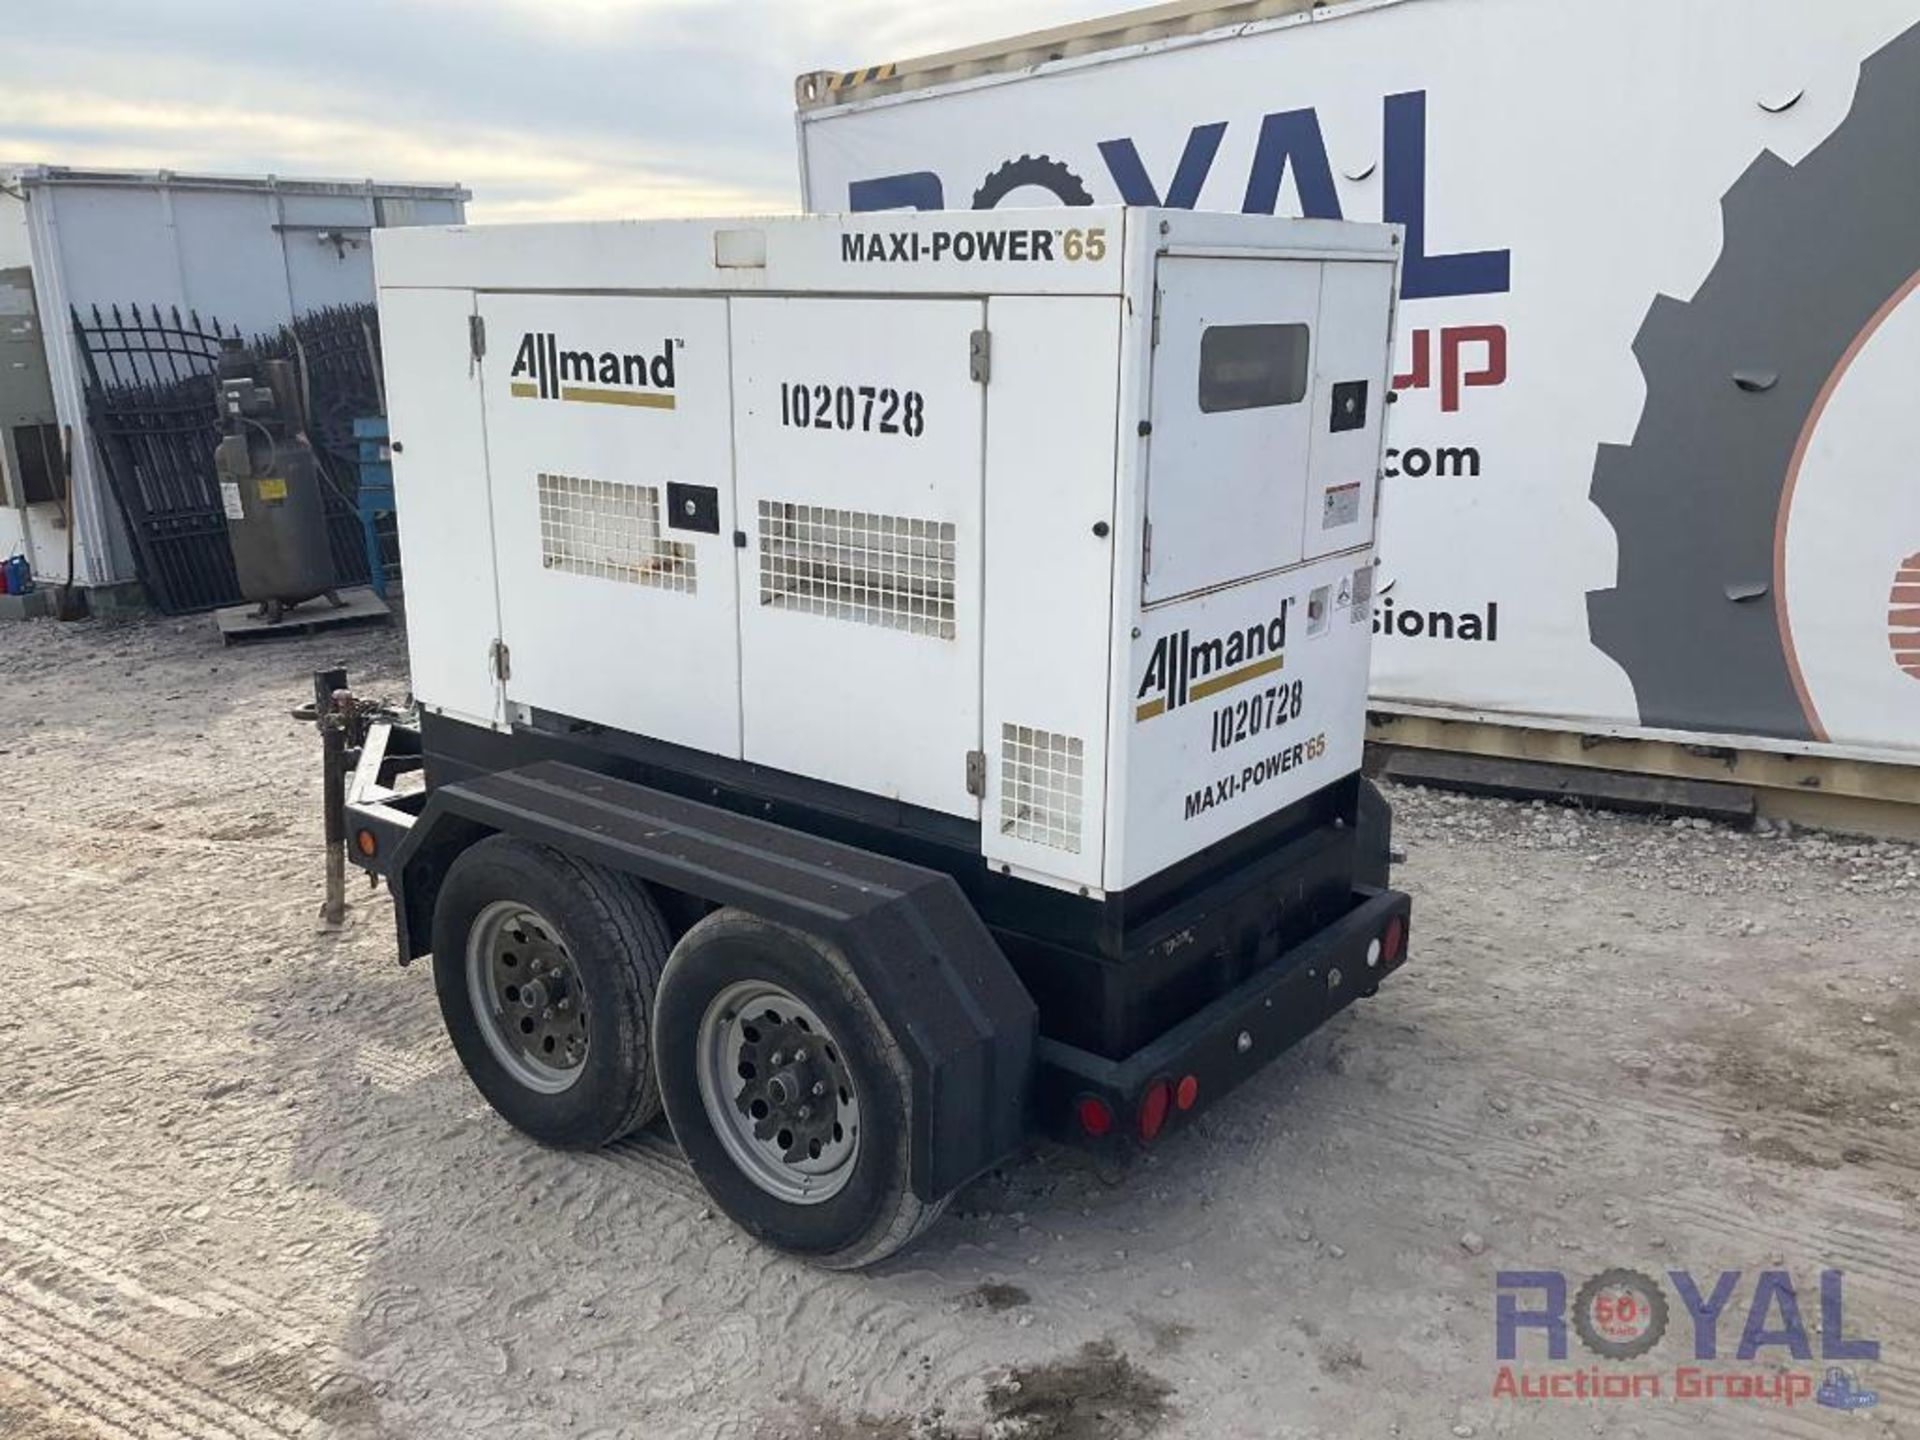 2017 Allmand Maxipower 65-8C1 T/A Towable Generator - Image 4 of 18